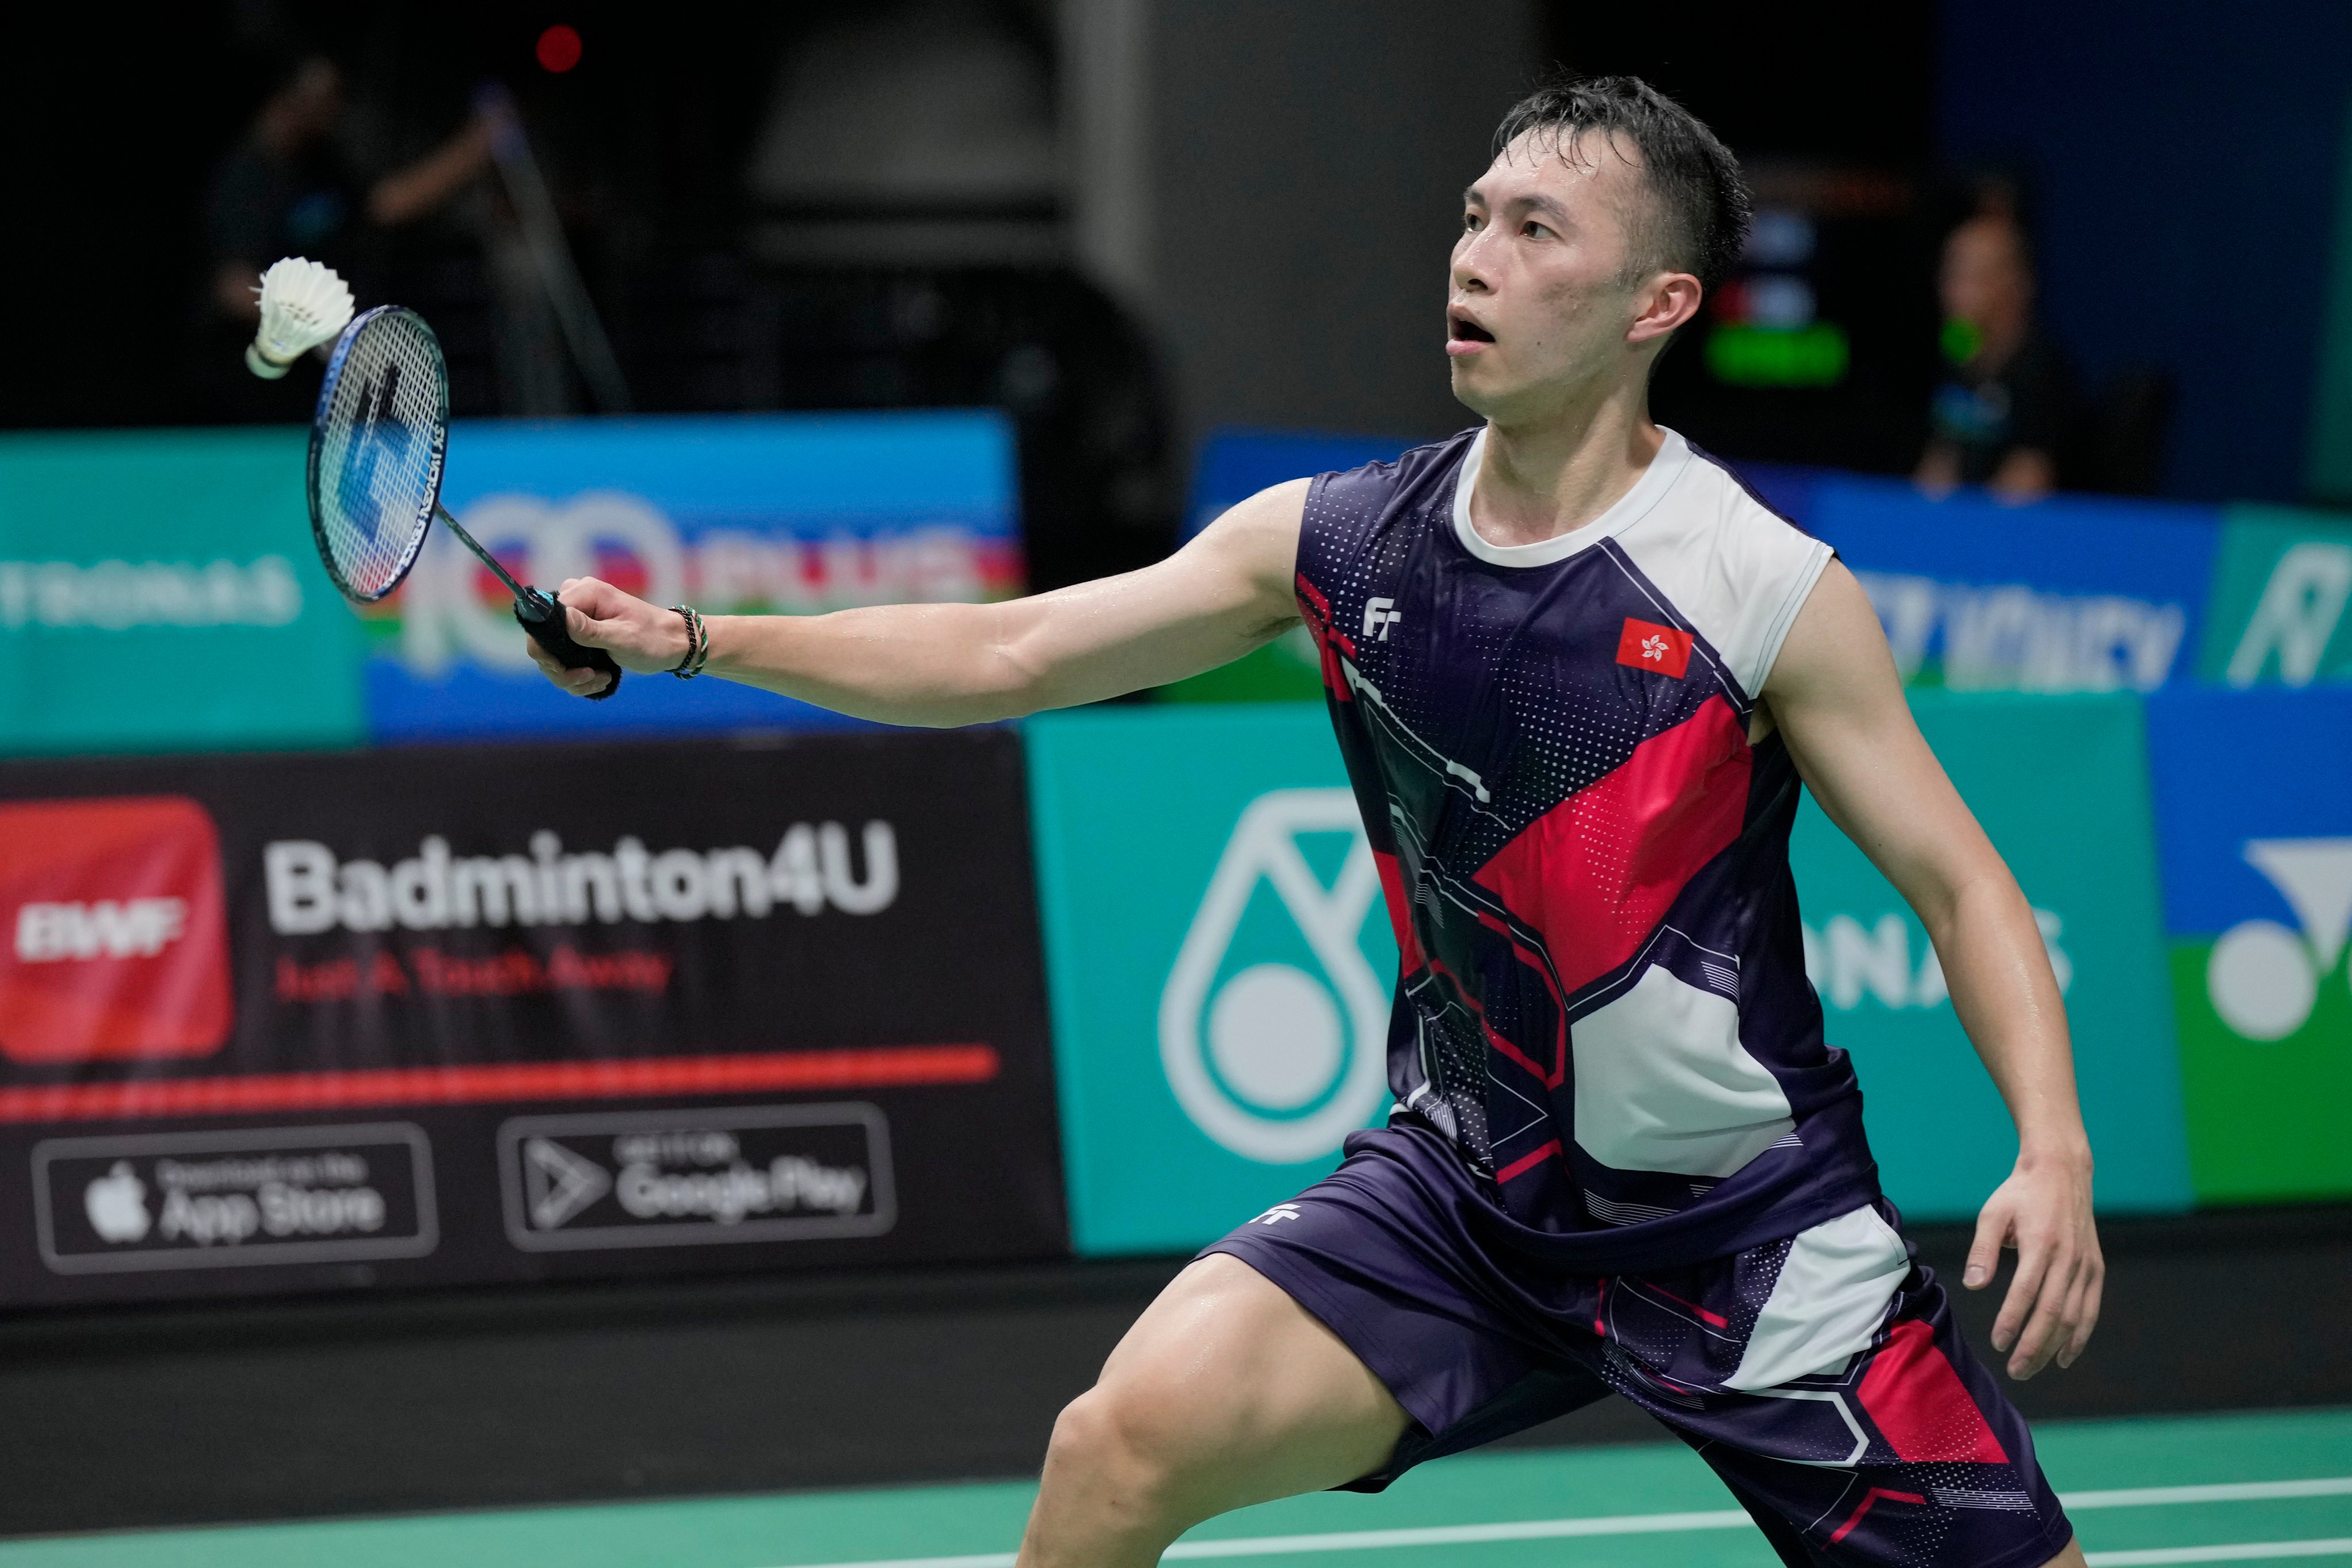 Hong Kong’s Angus Ng plays a shot against Indonesia’s Anthony Sinisuka Ginting during their men’s singles match at the Malaysia Open. Photo: AP